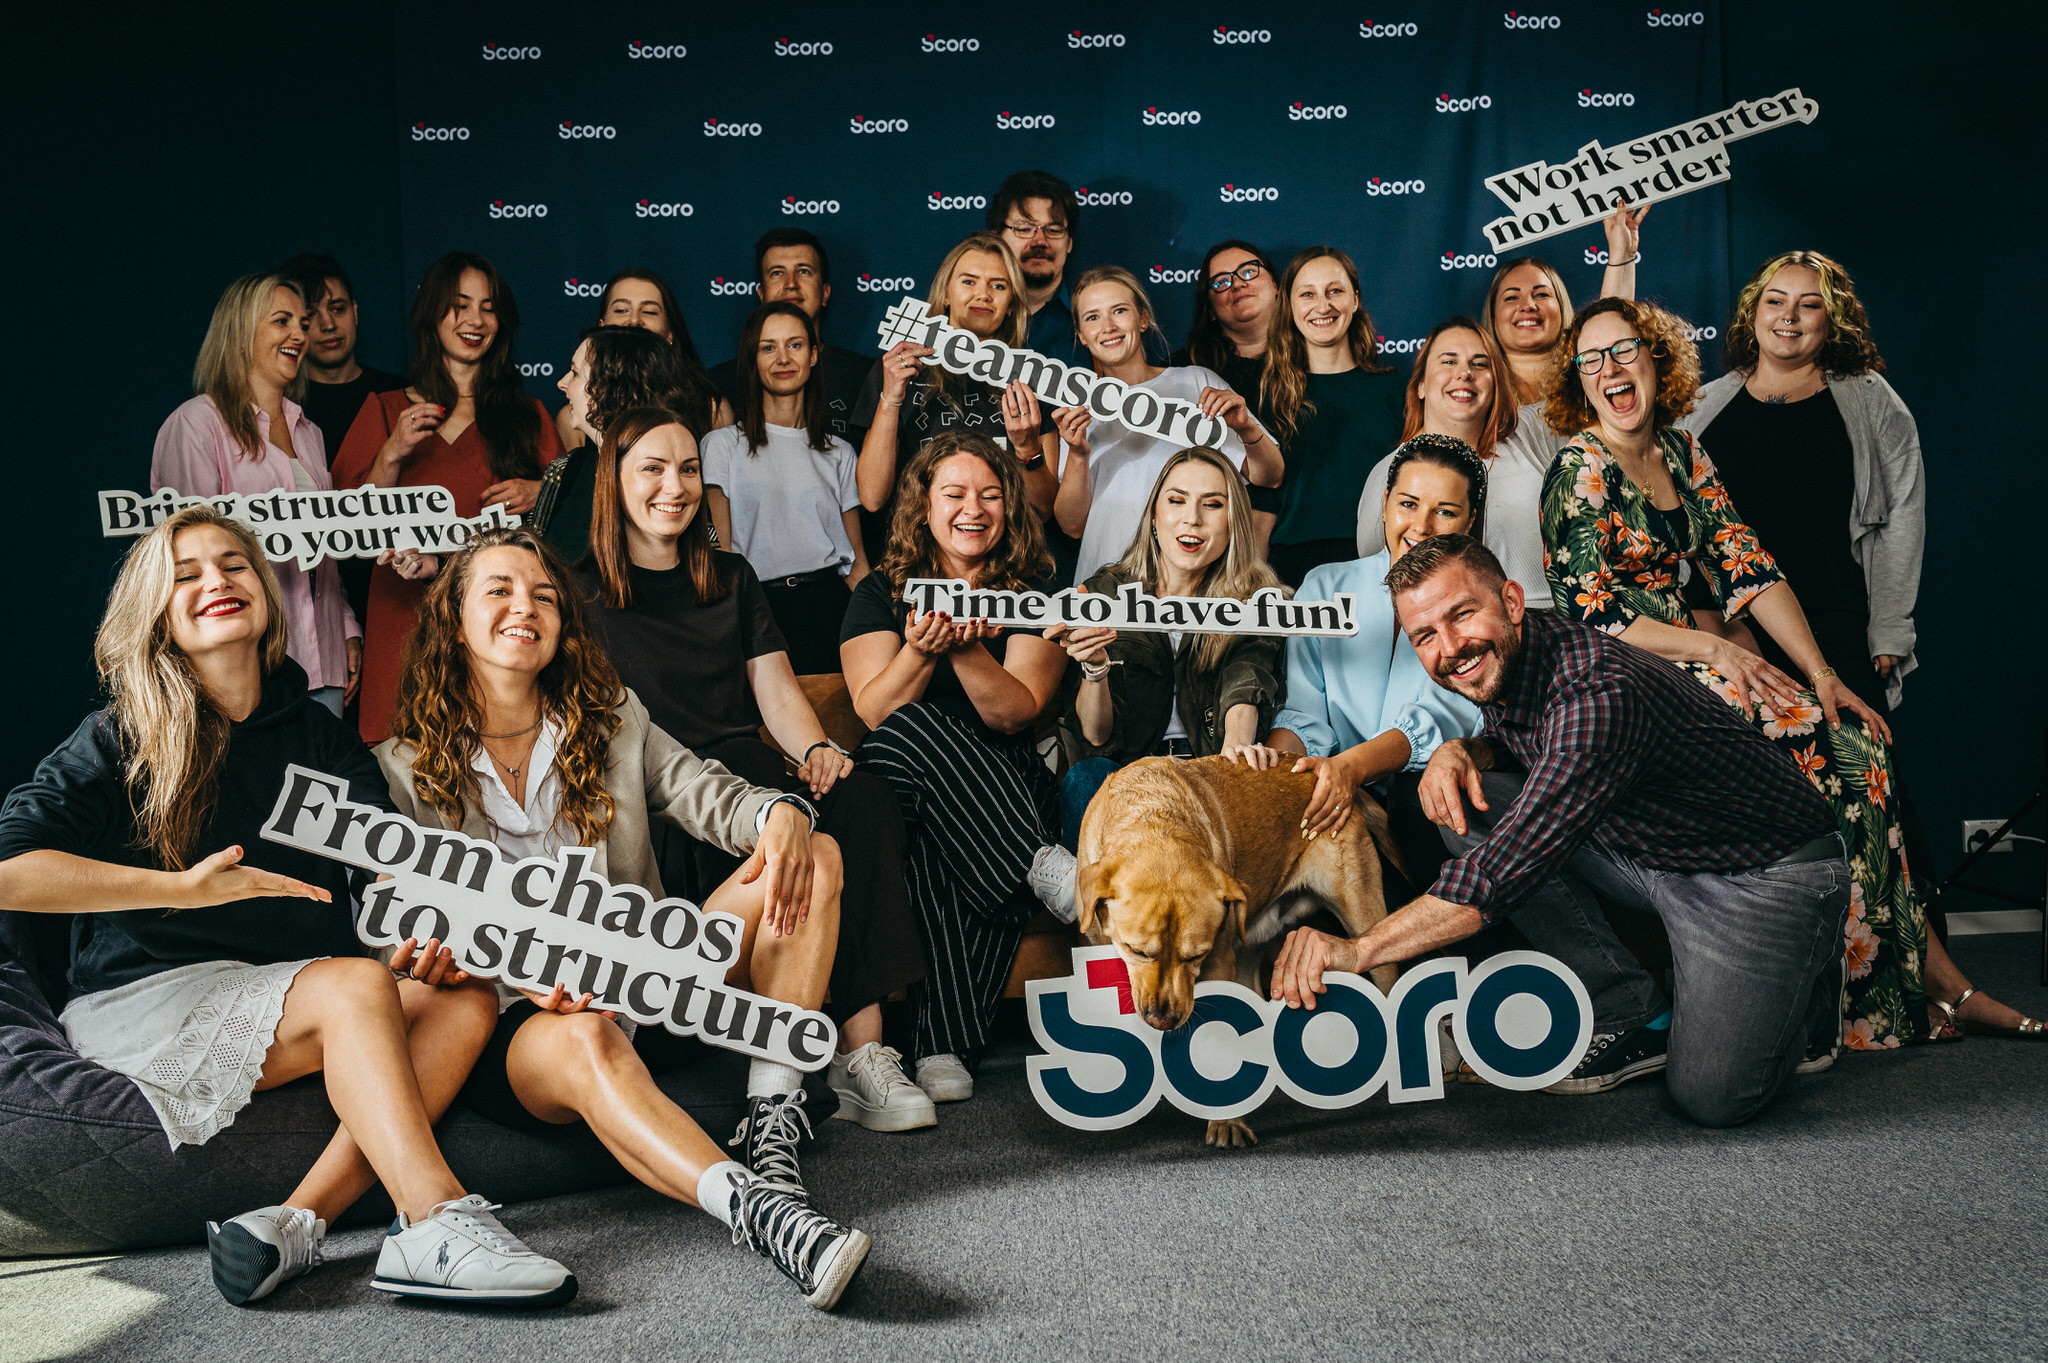 Group picture of Scoro's employees